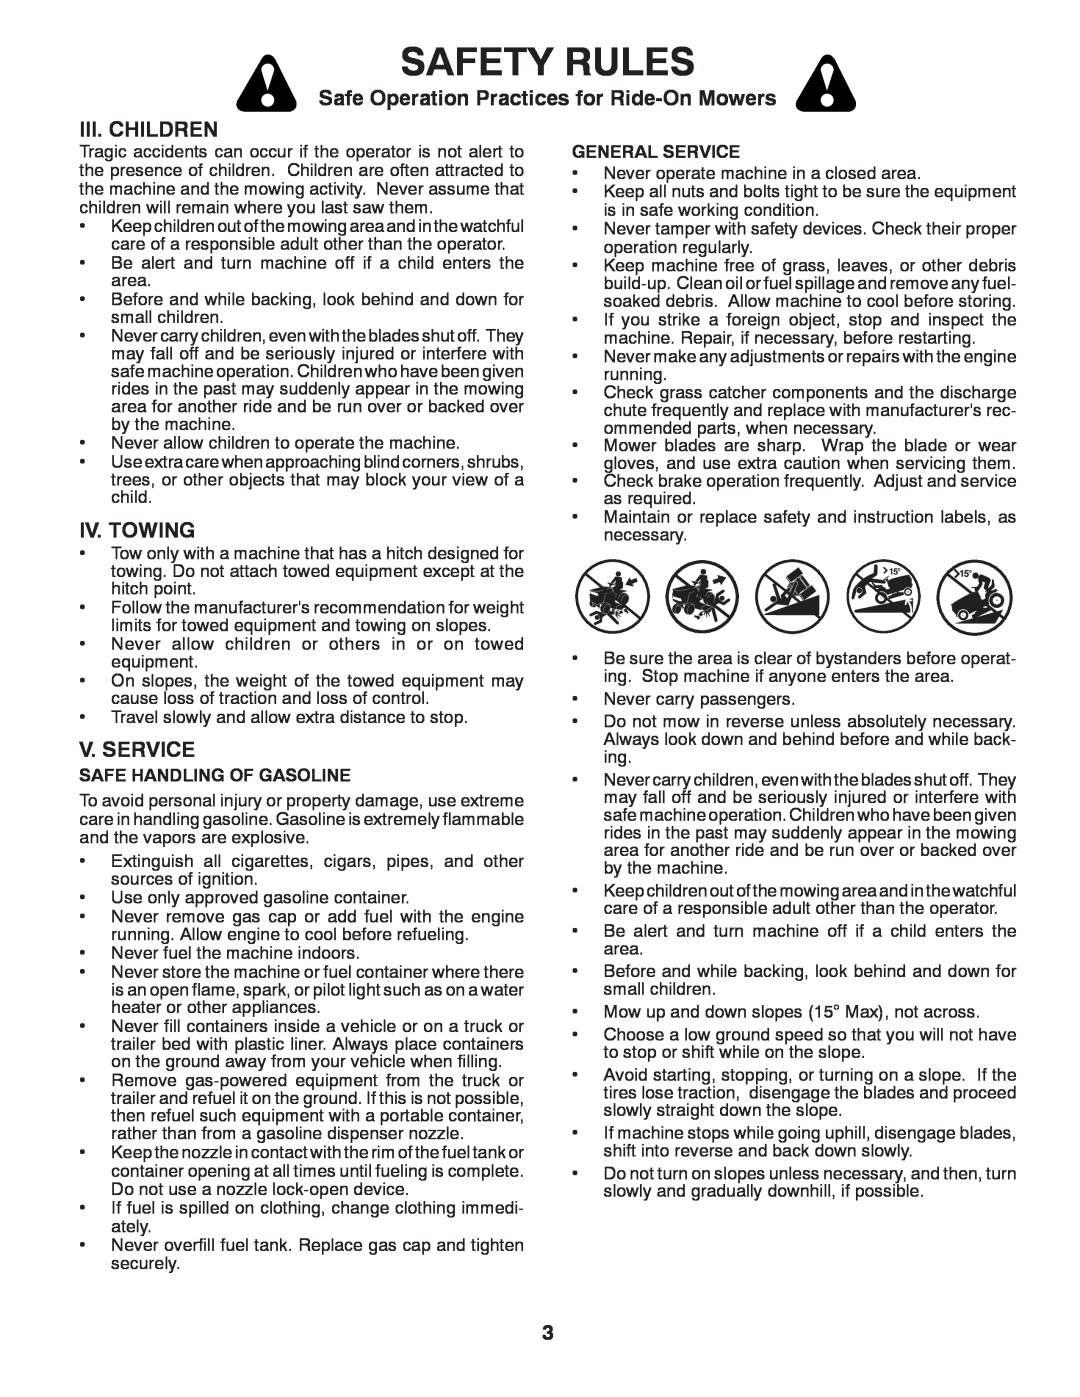 McCulloch 96012010300 Iii. Children, Iv. Towing, V. Service, Safety Rules, Safe Operation Practices for Ride-On Mowers 